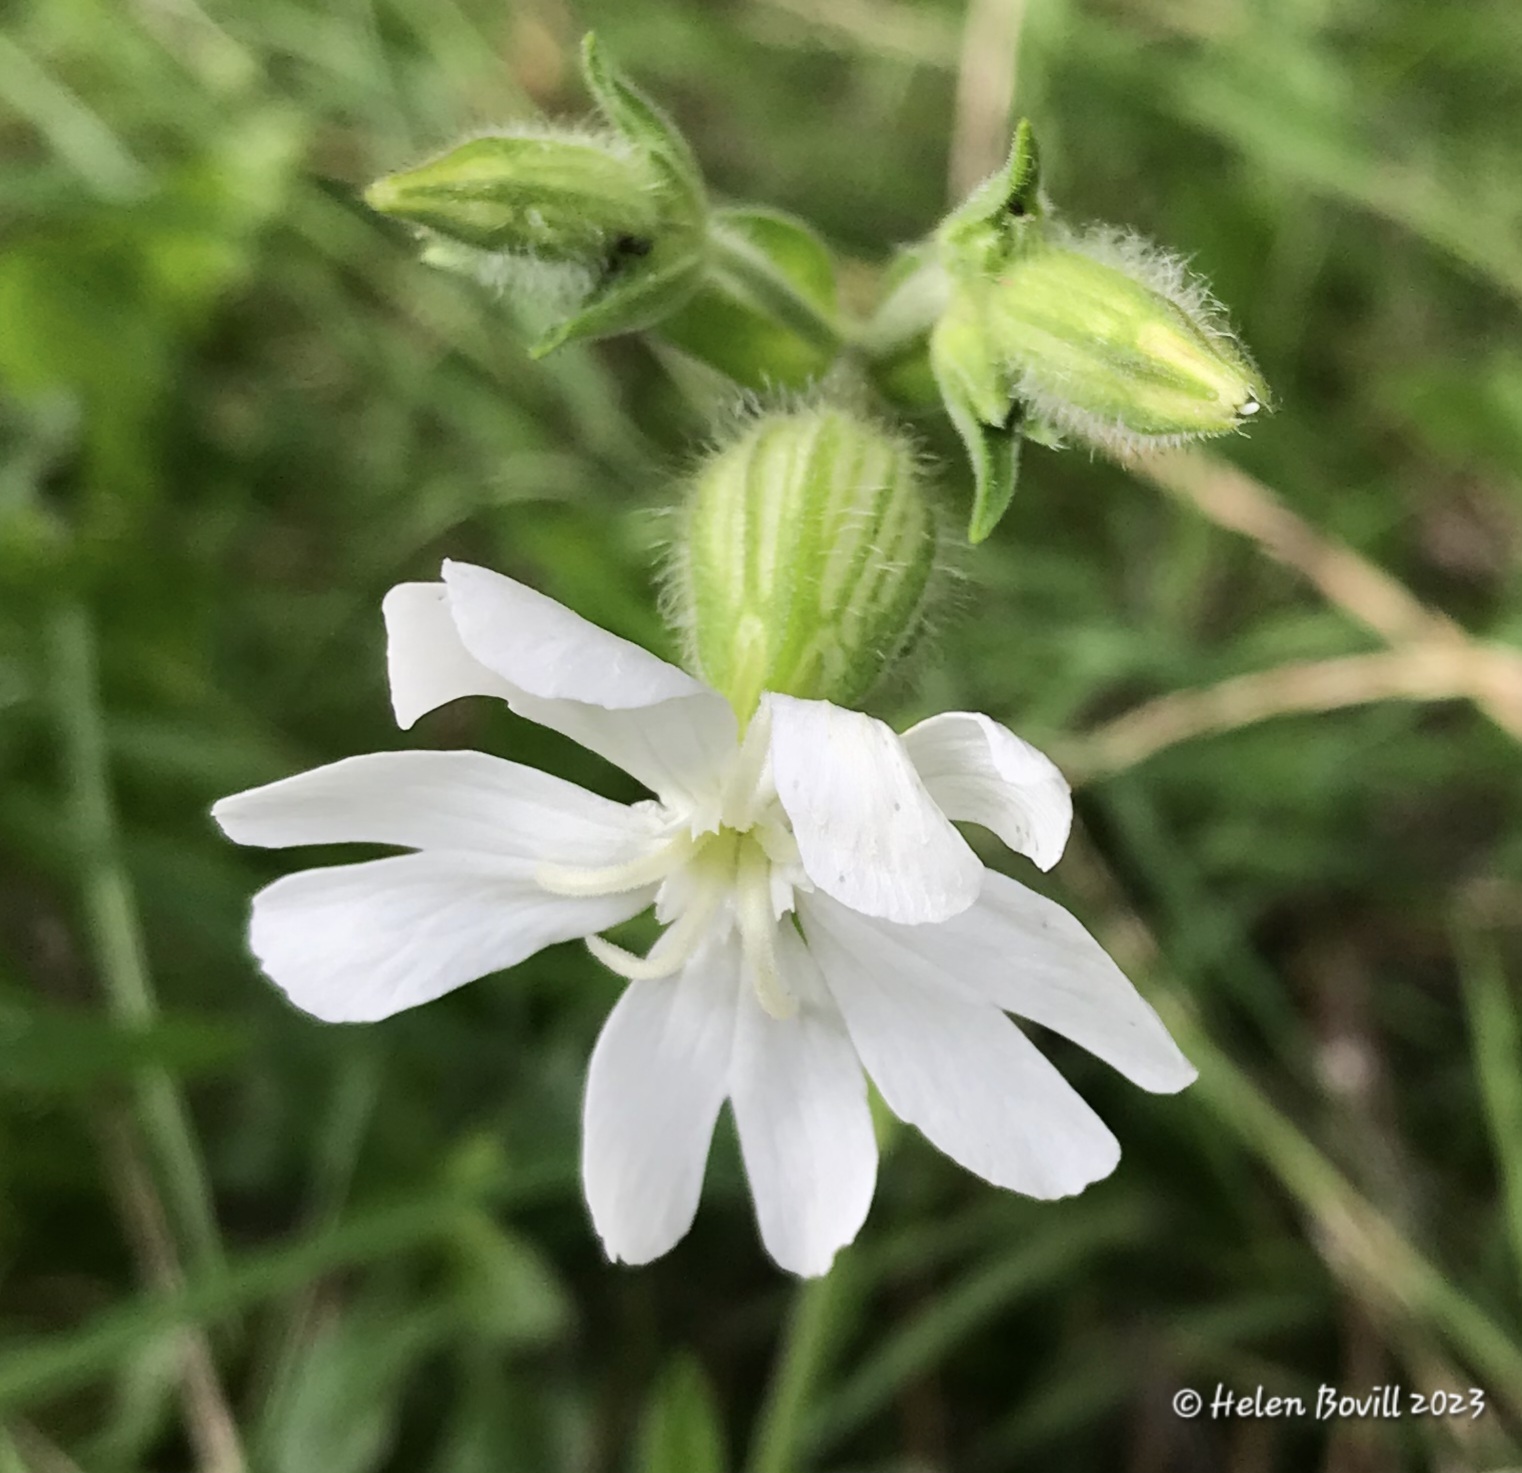 A white campion flower on the grass verge alongside the cemetery